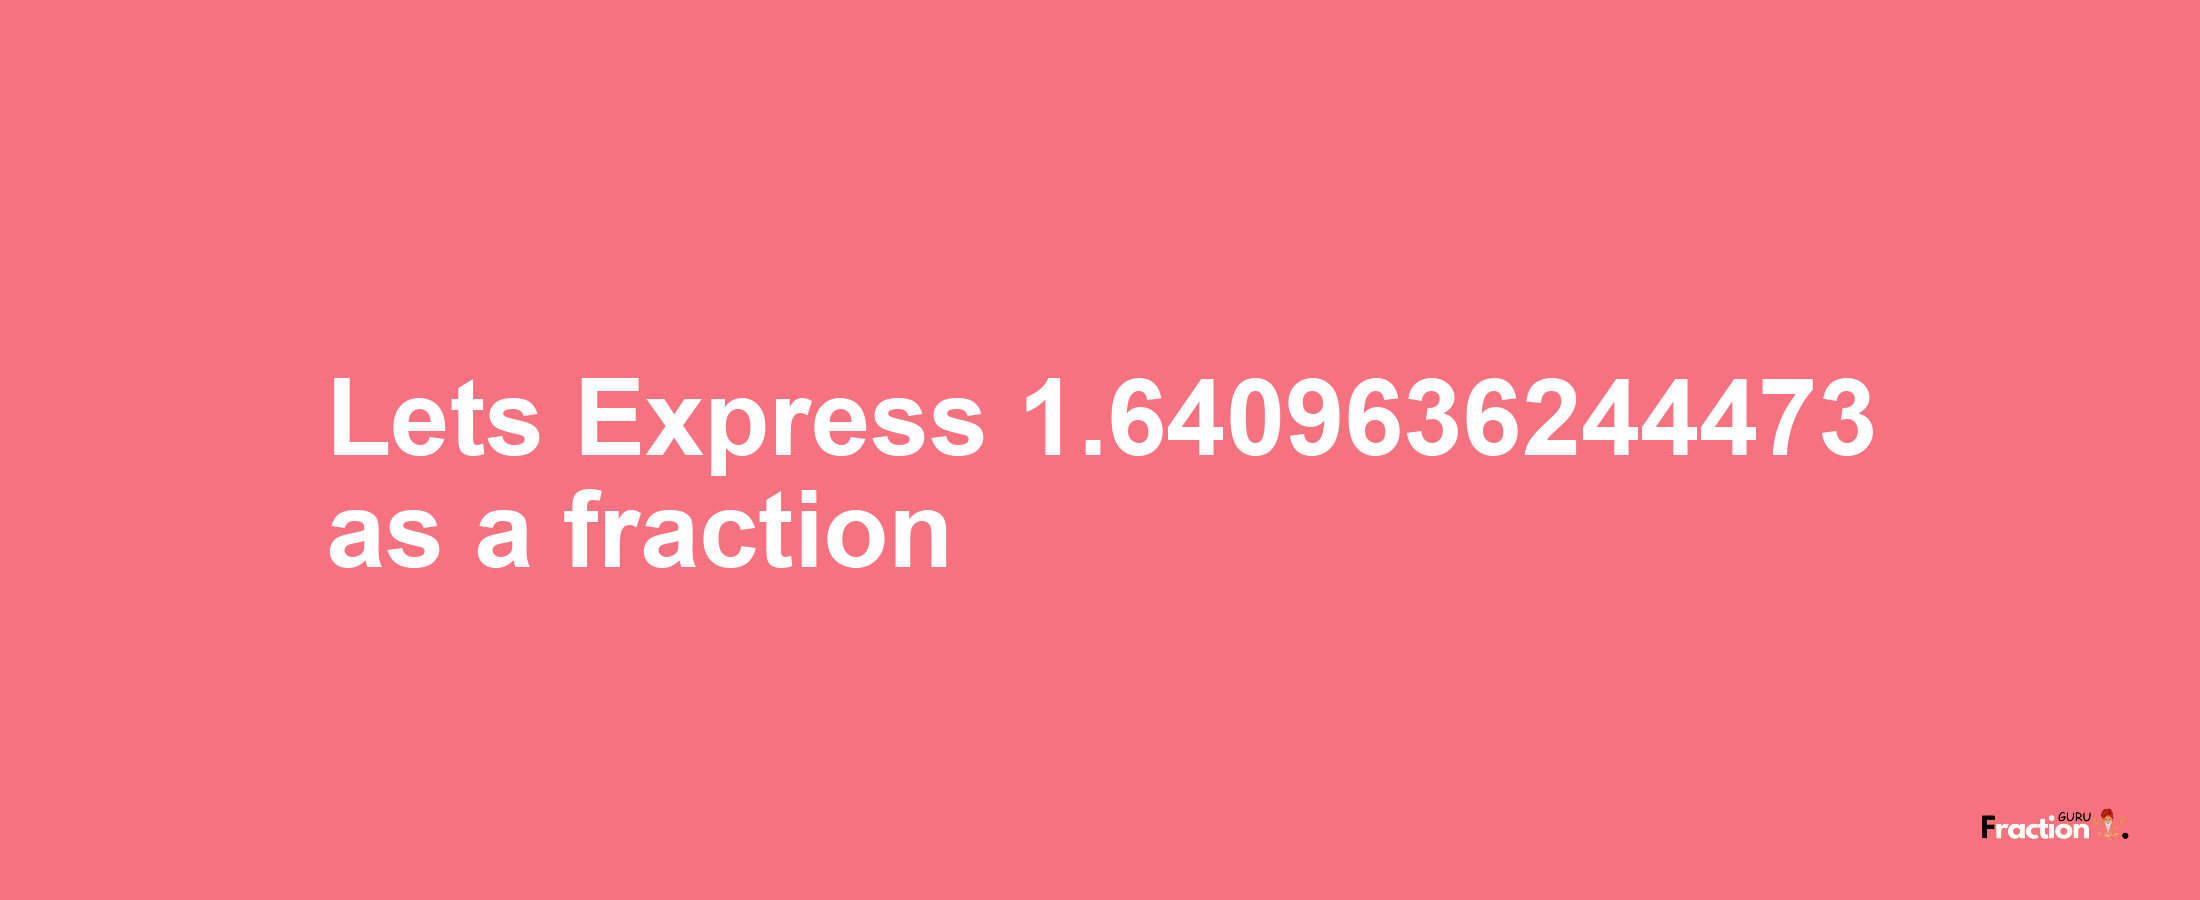 Lets Express 1.6409636244473 as afraction